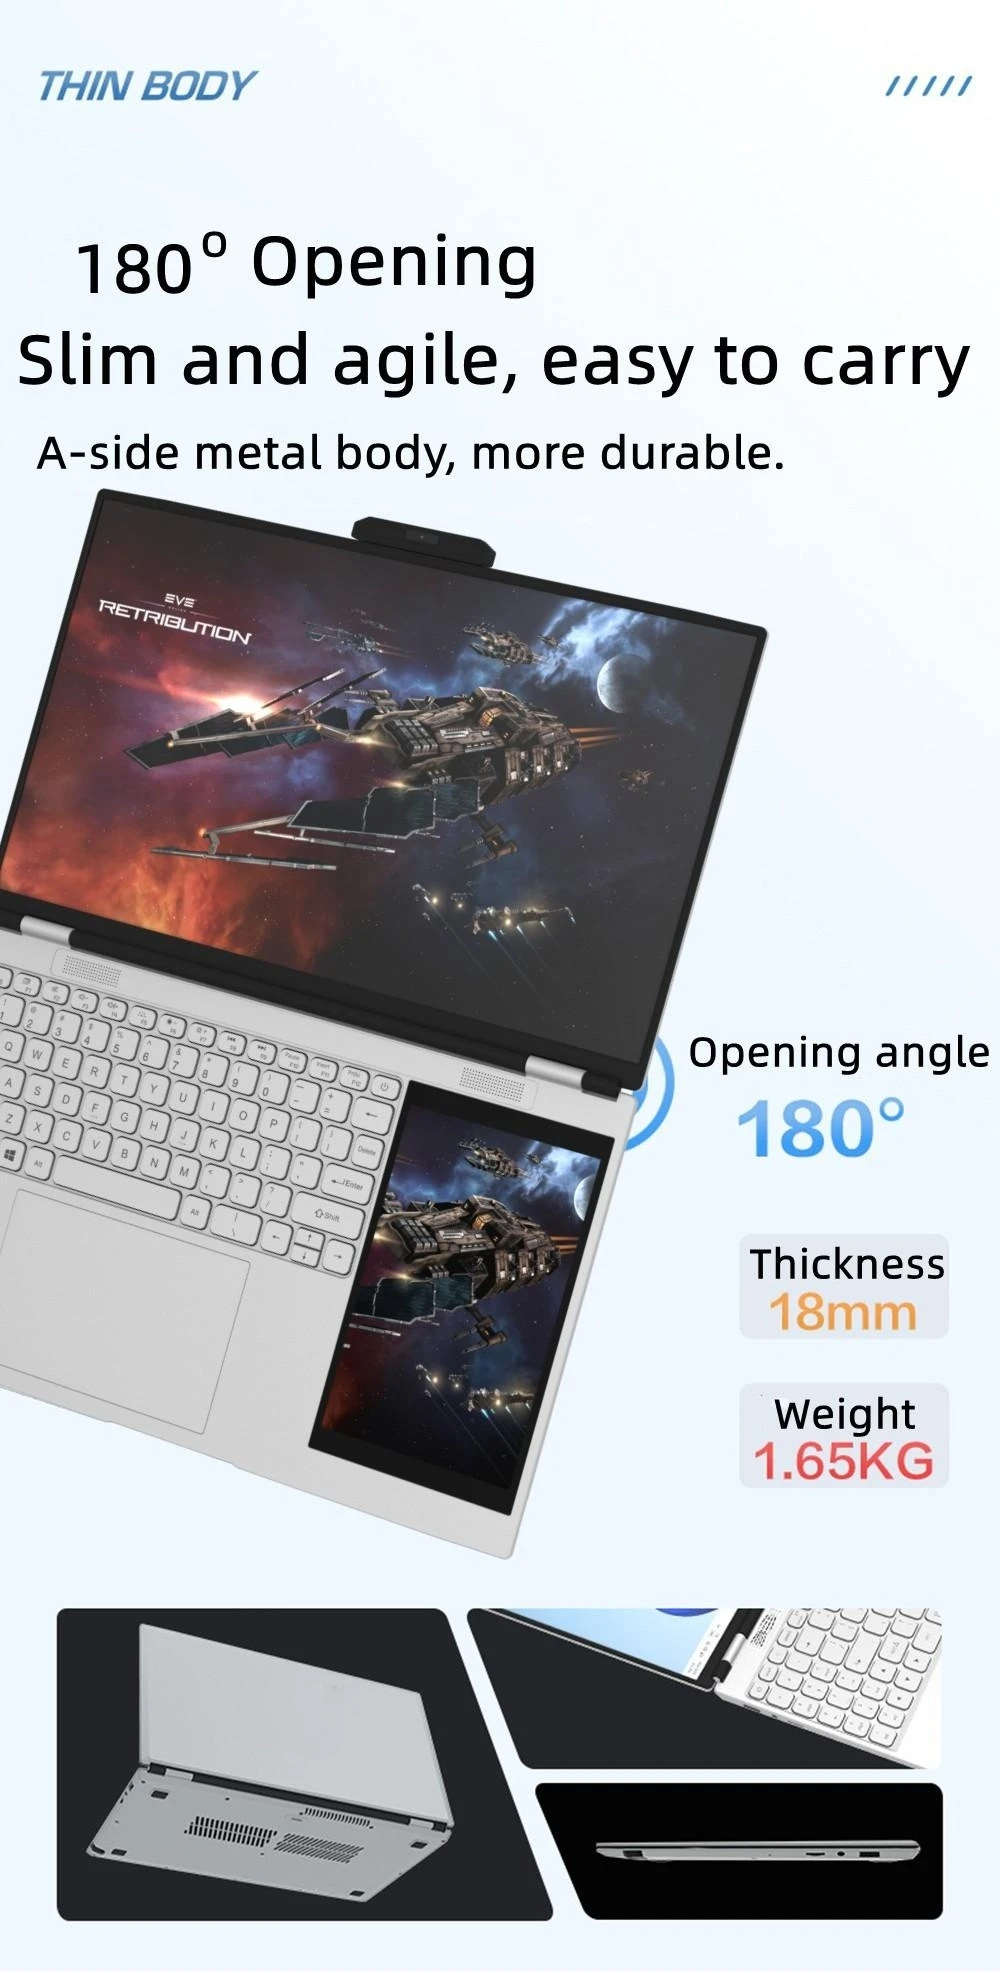 Sd43cce97016f41c5be0344a8e39bbe6a7 New Arrivals 12th Generation Intel N95 Dual Screen Laptop Gaming Laptop 15.6inch 2K LCD+7inch IPS Touch Screen PC Portable